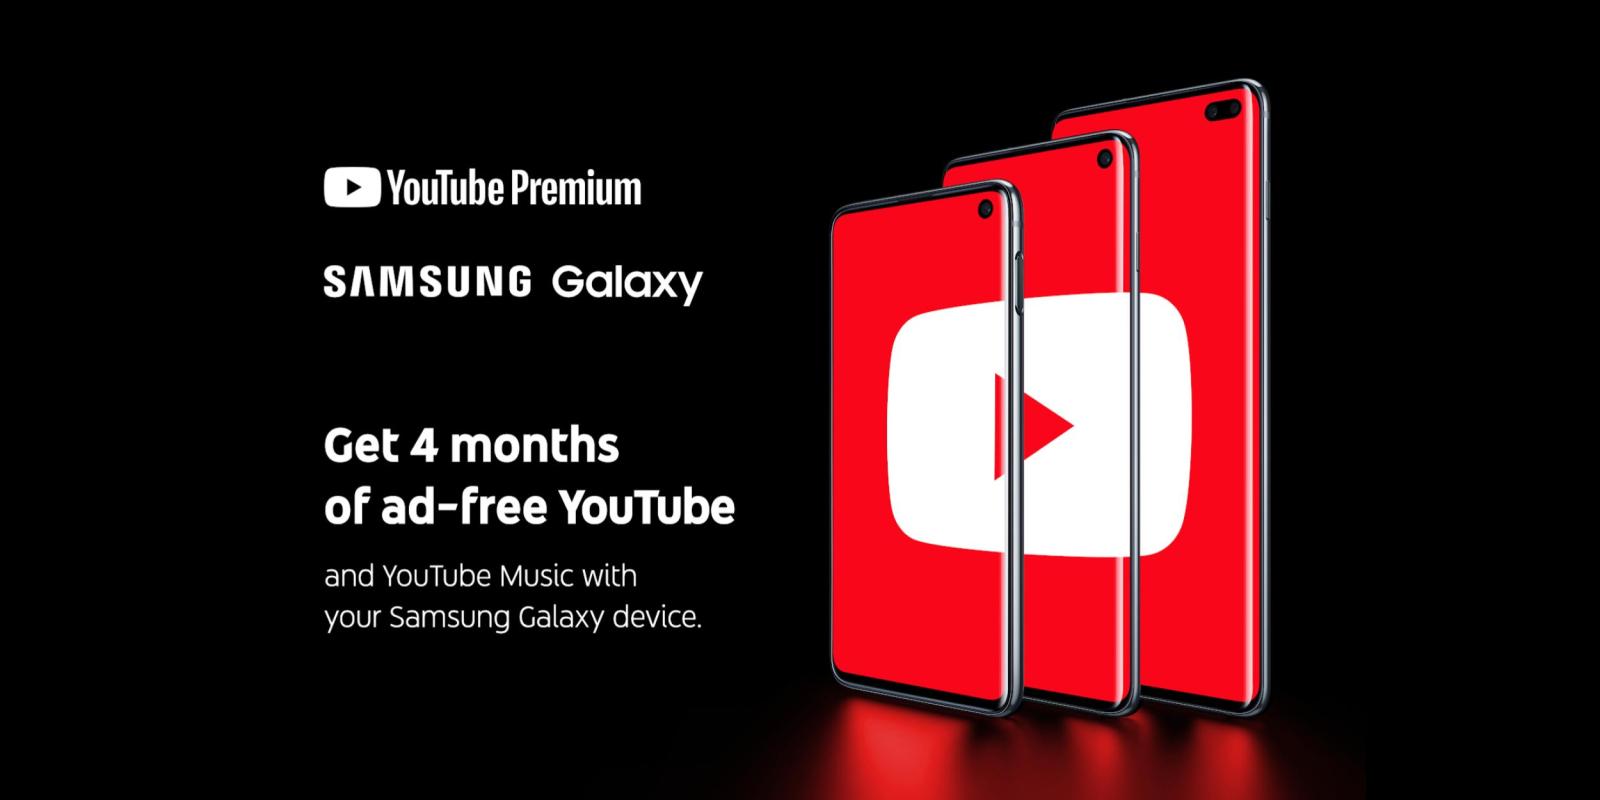 Samsung Galaxy owners are getting free YouTube Premium subscriptions